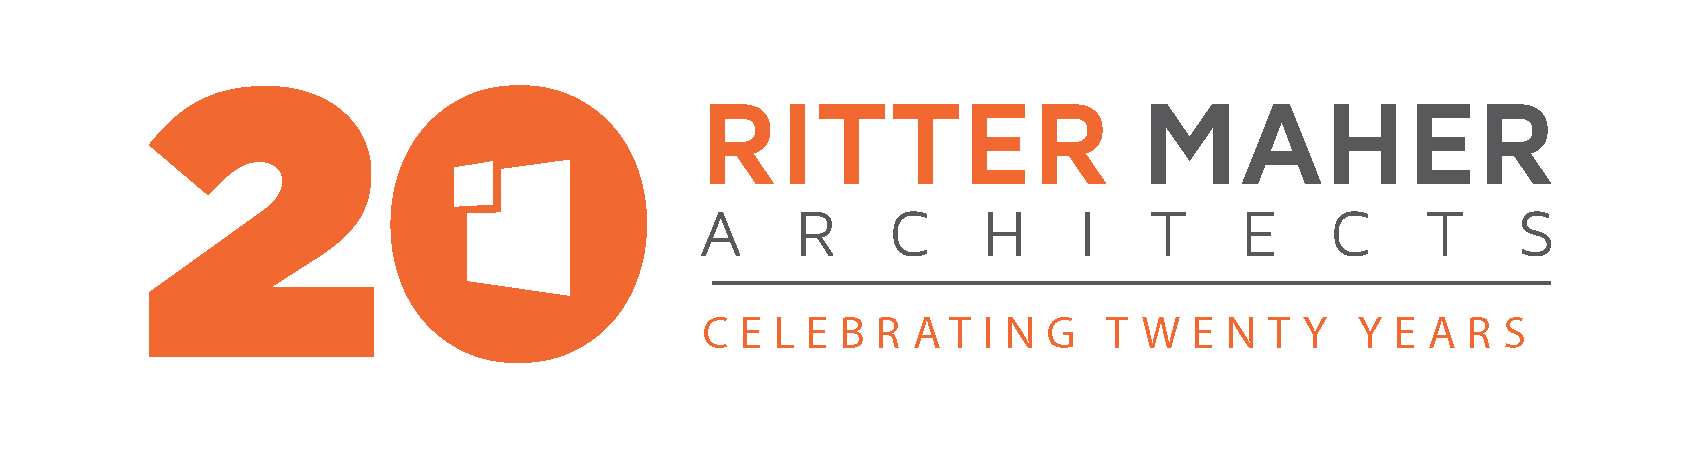 Ritter Maher Architects